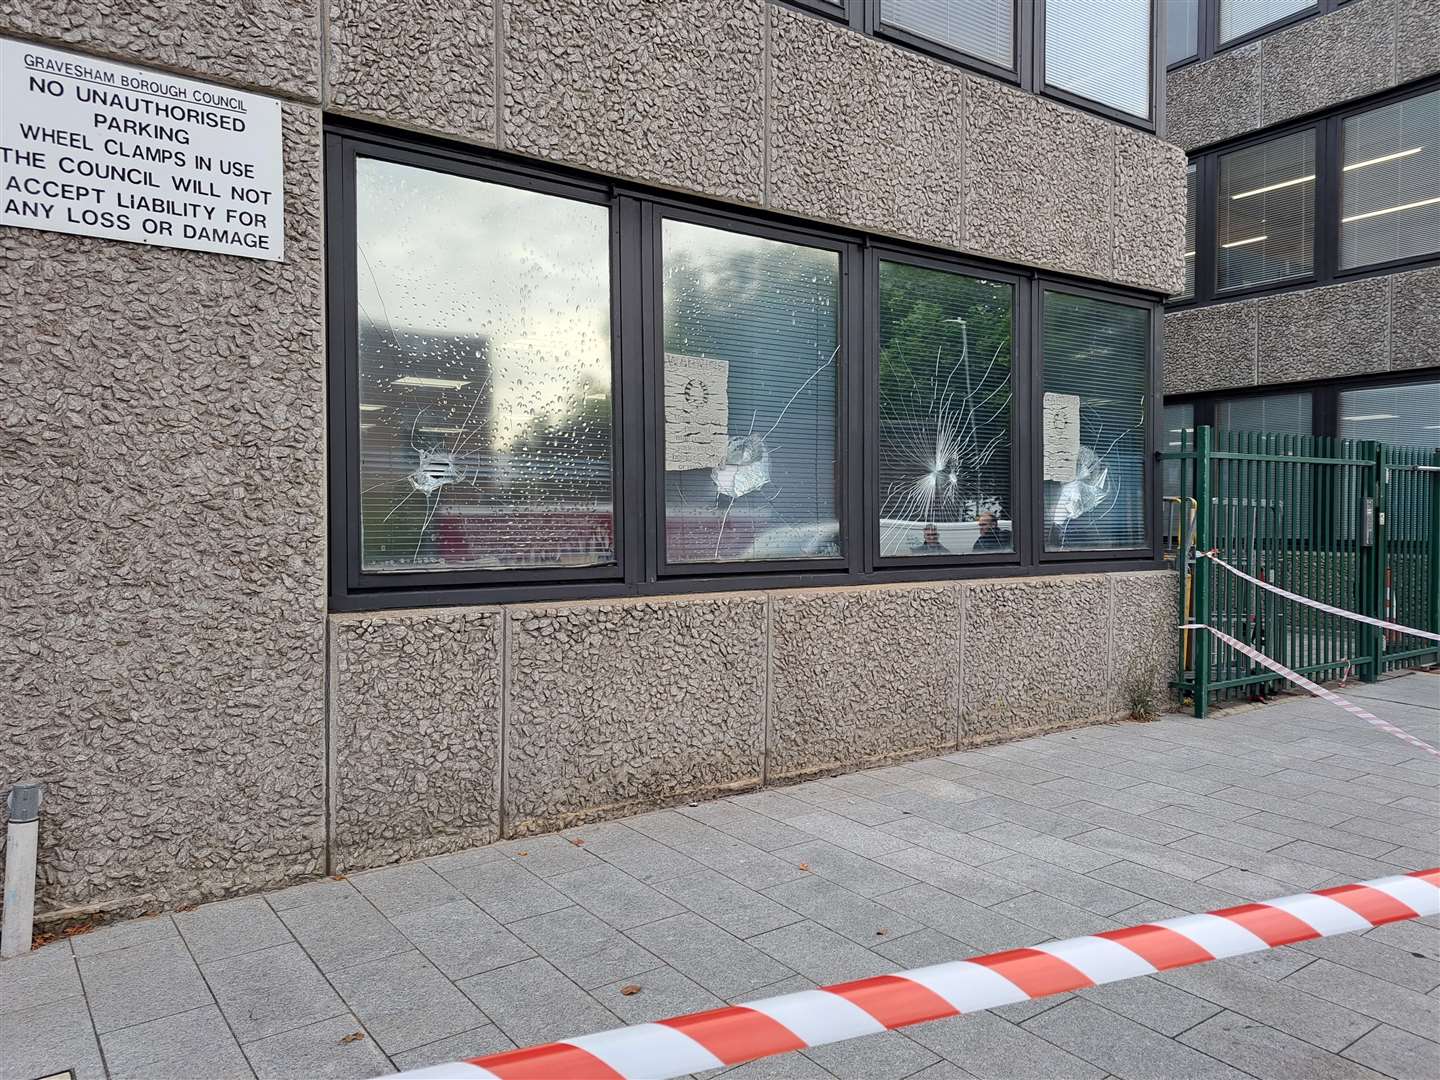 Smashed windows at The Woodville and Gravesham Civic Centre in Windmill Street, Gravesend